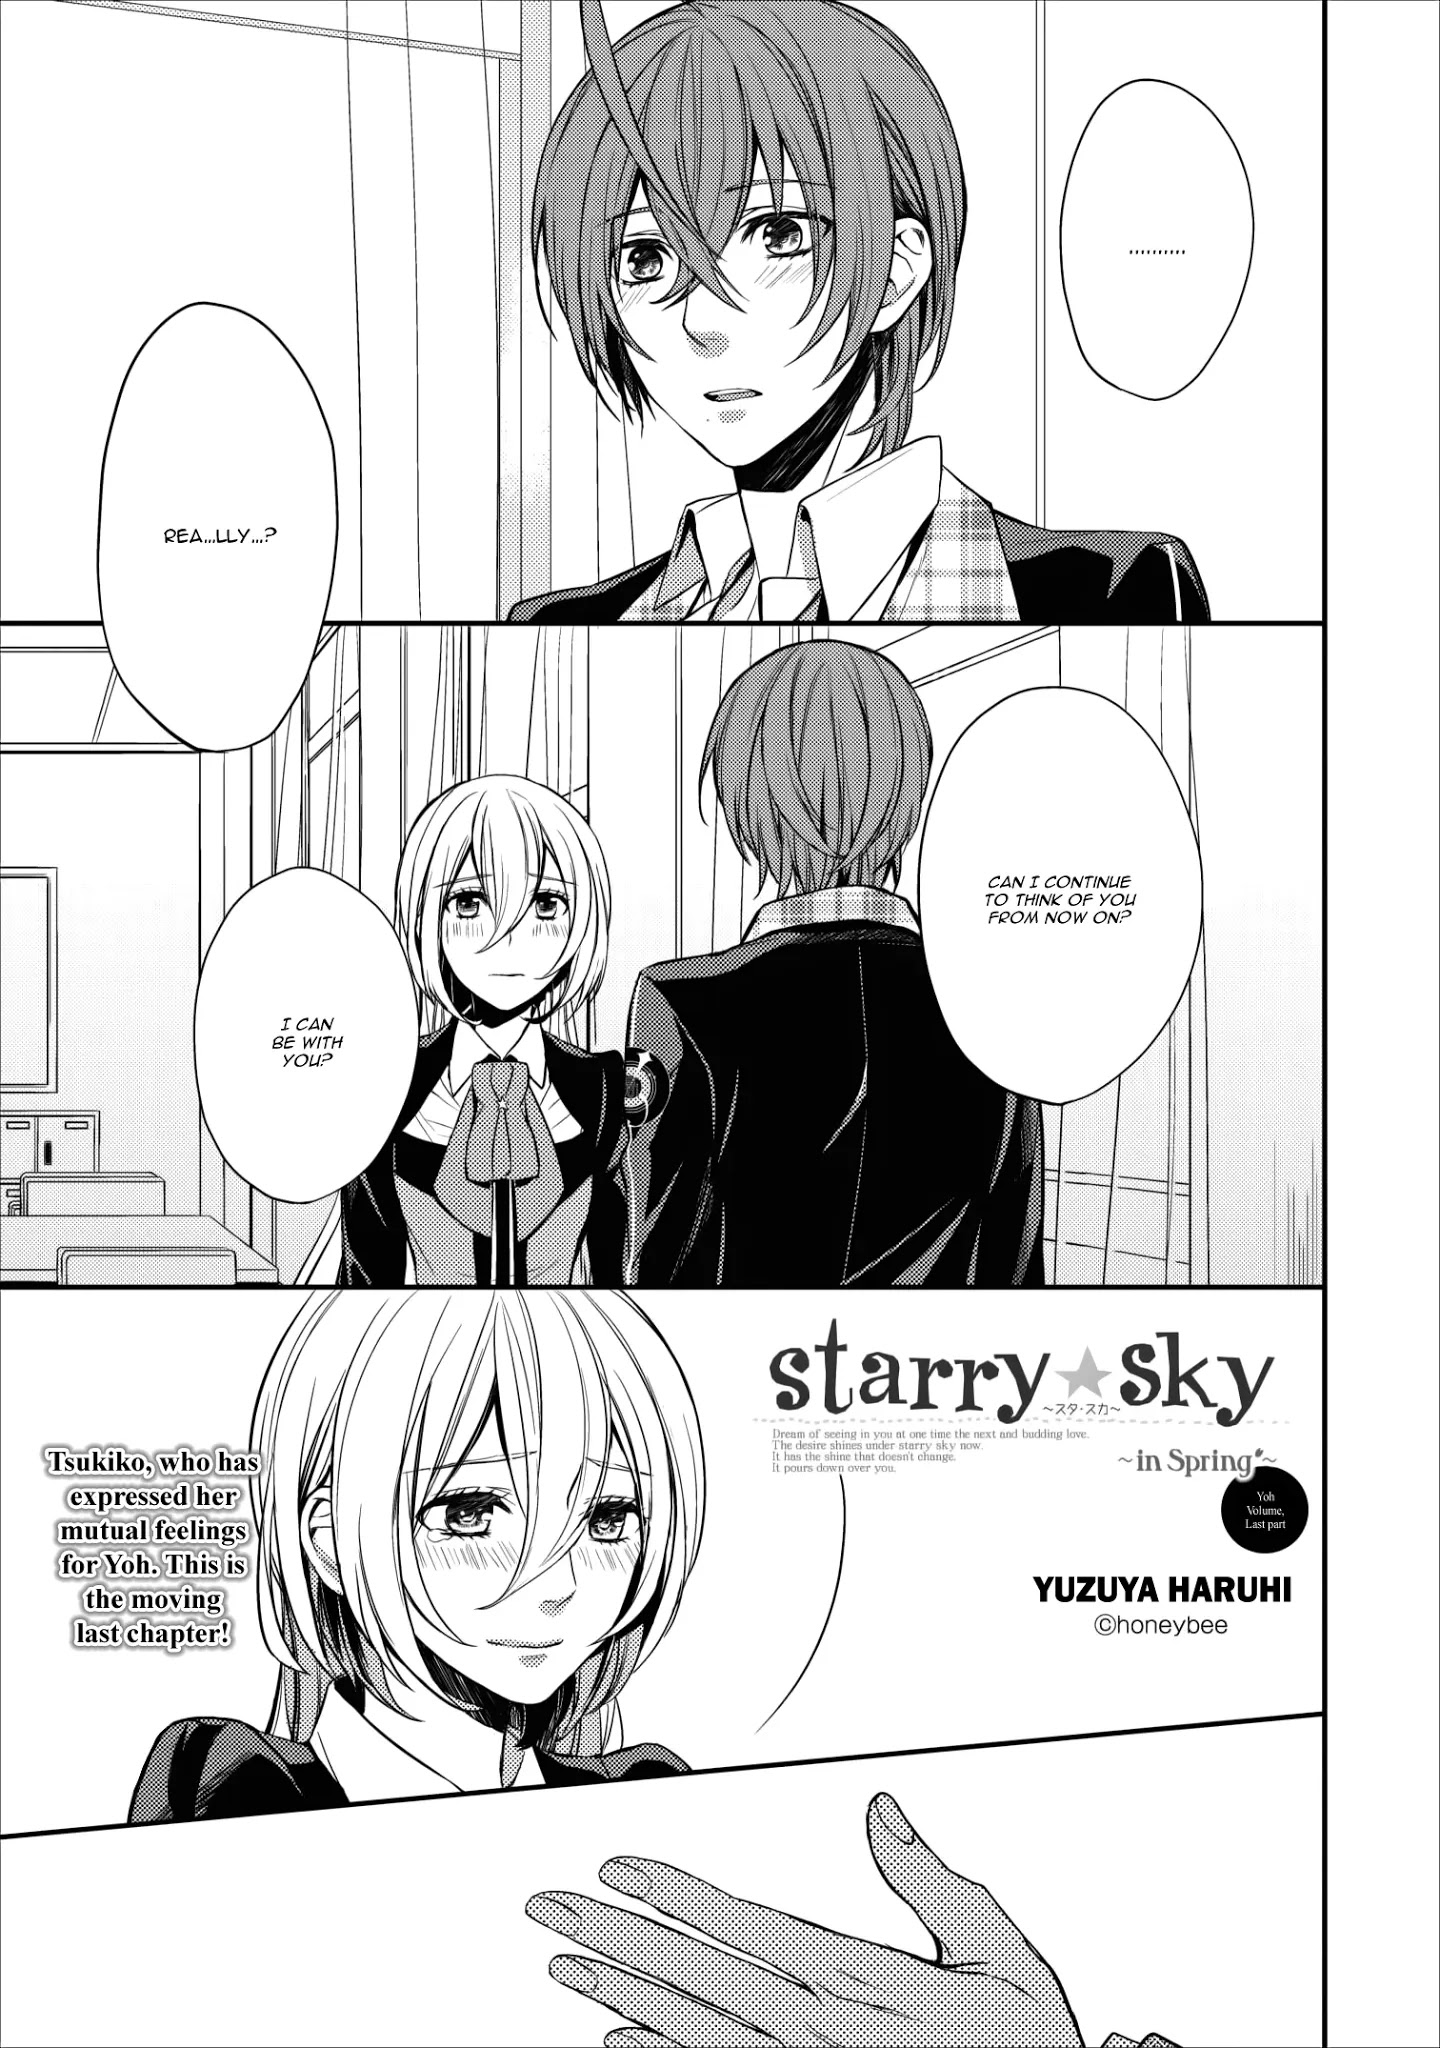 Starry Sky - In Spring - Page 3